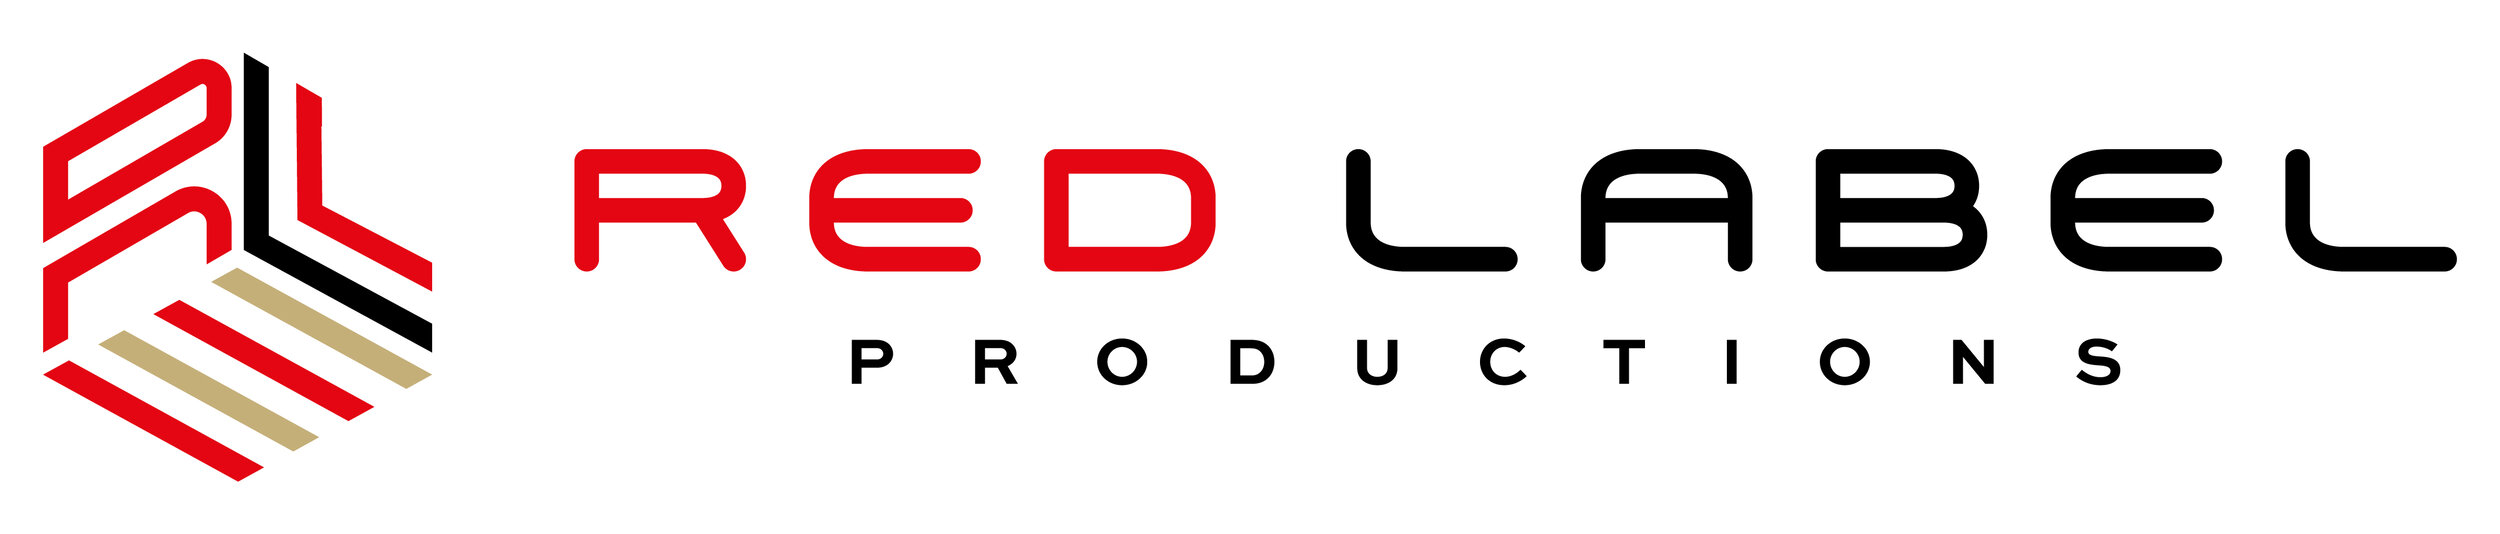 Red Label Productions